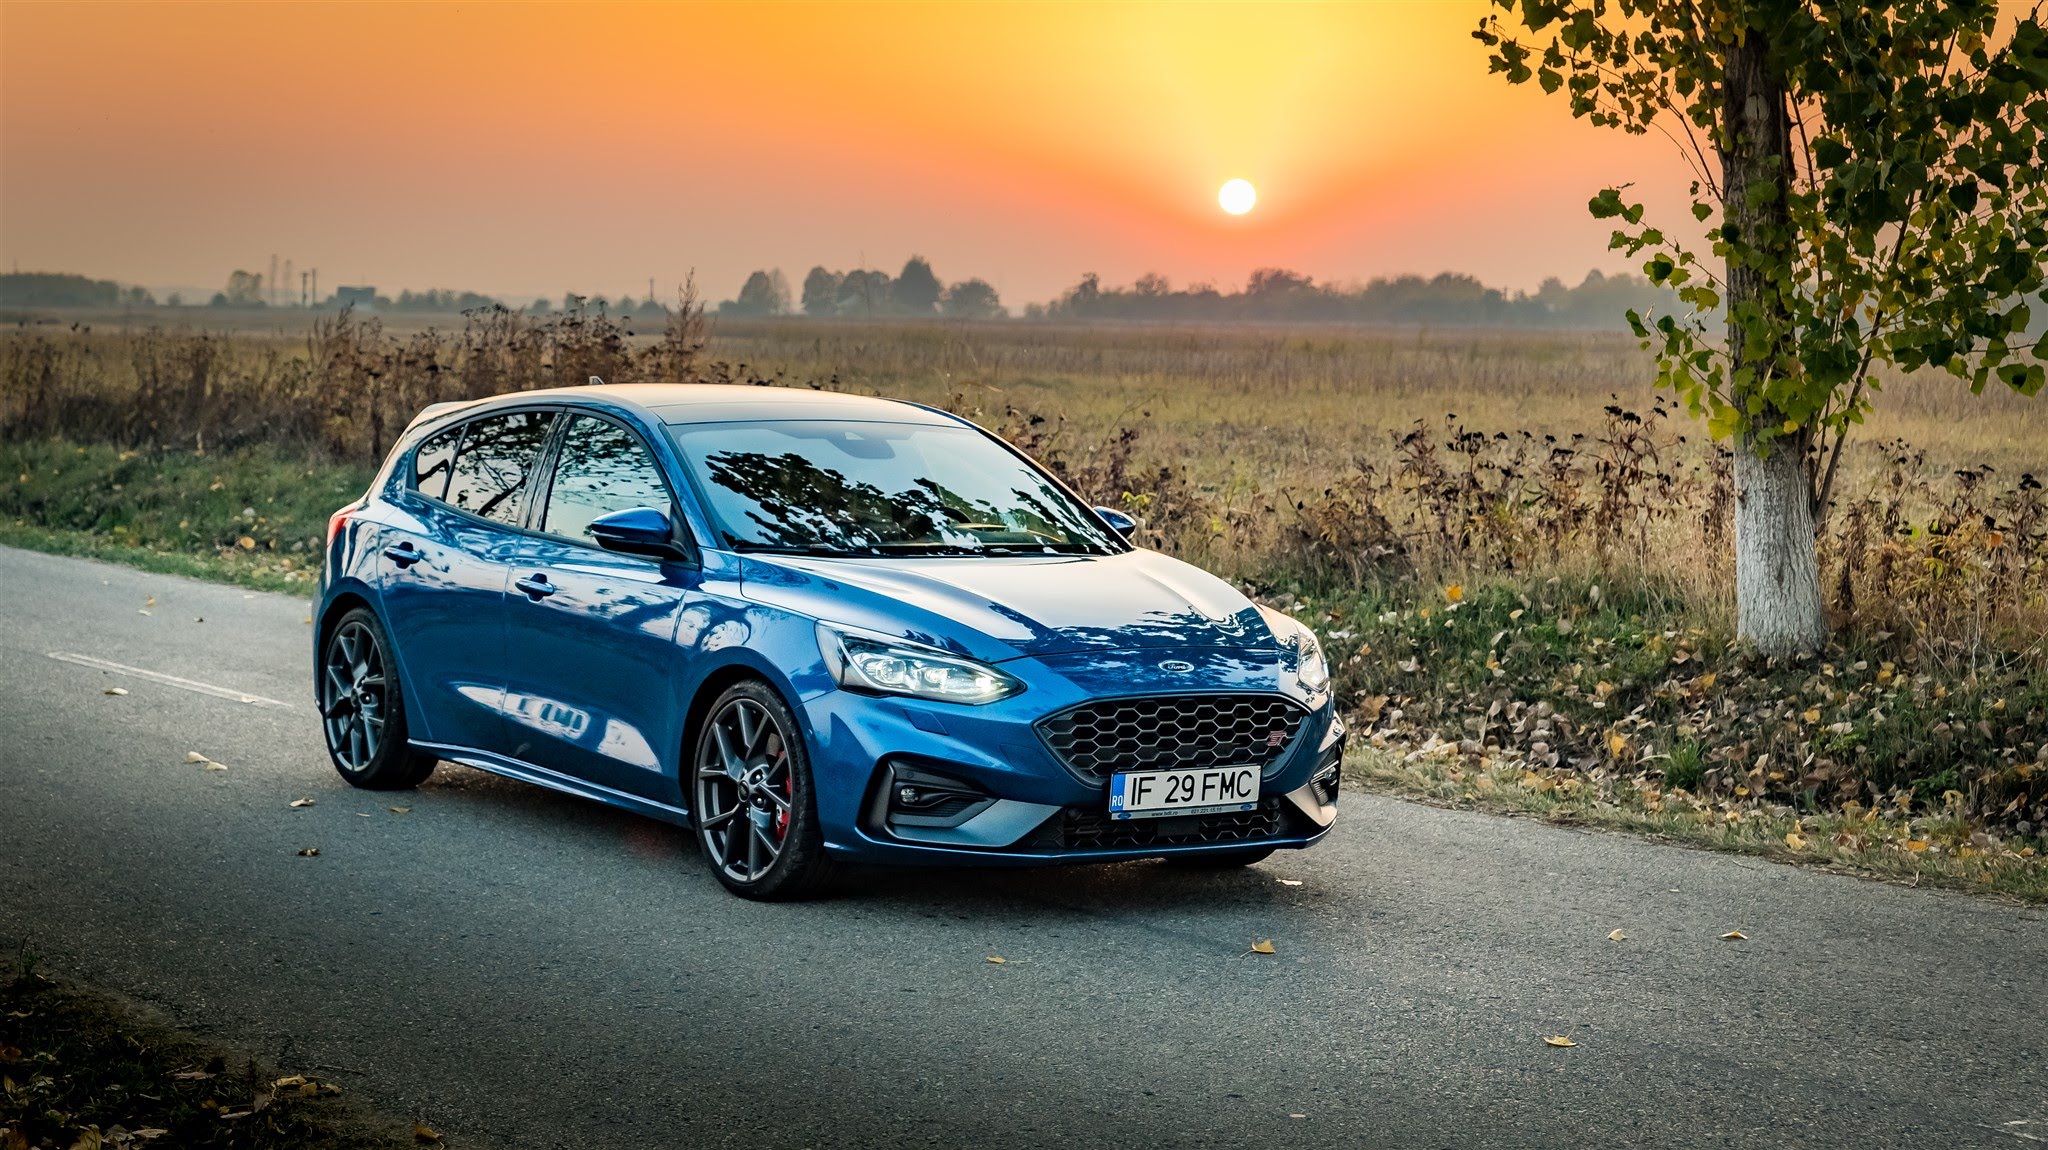 https://www.gadget.ro/wp-content/uploads/2019/12/Ford-Focus-ST-2019-2.3-EcoBoost-280-CP-M6-5.jpg